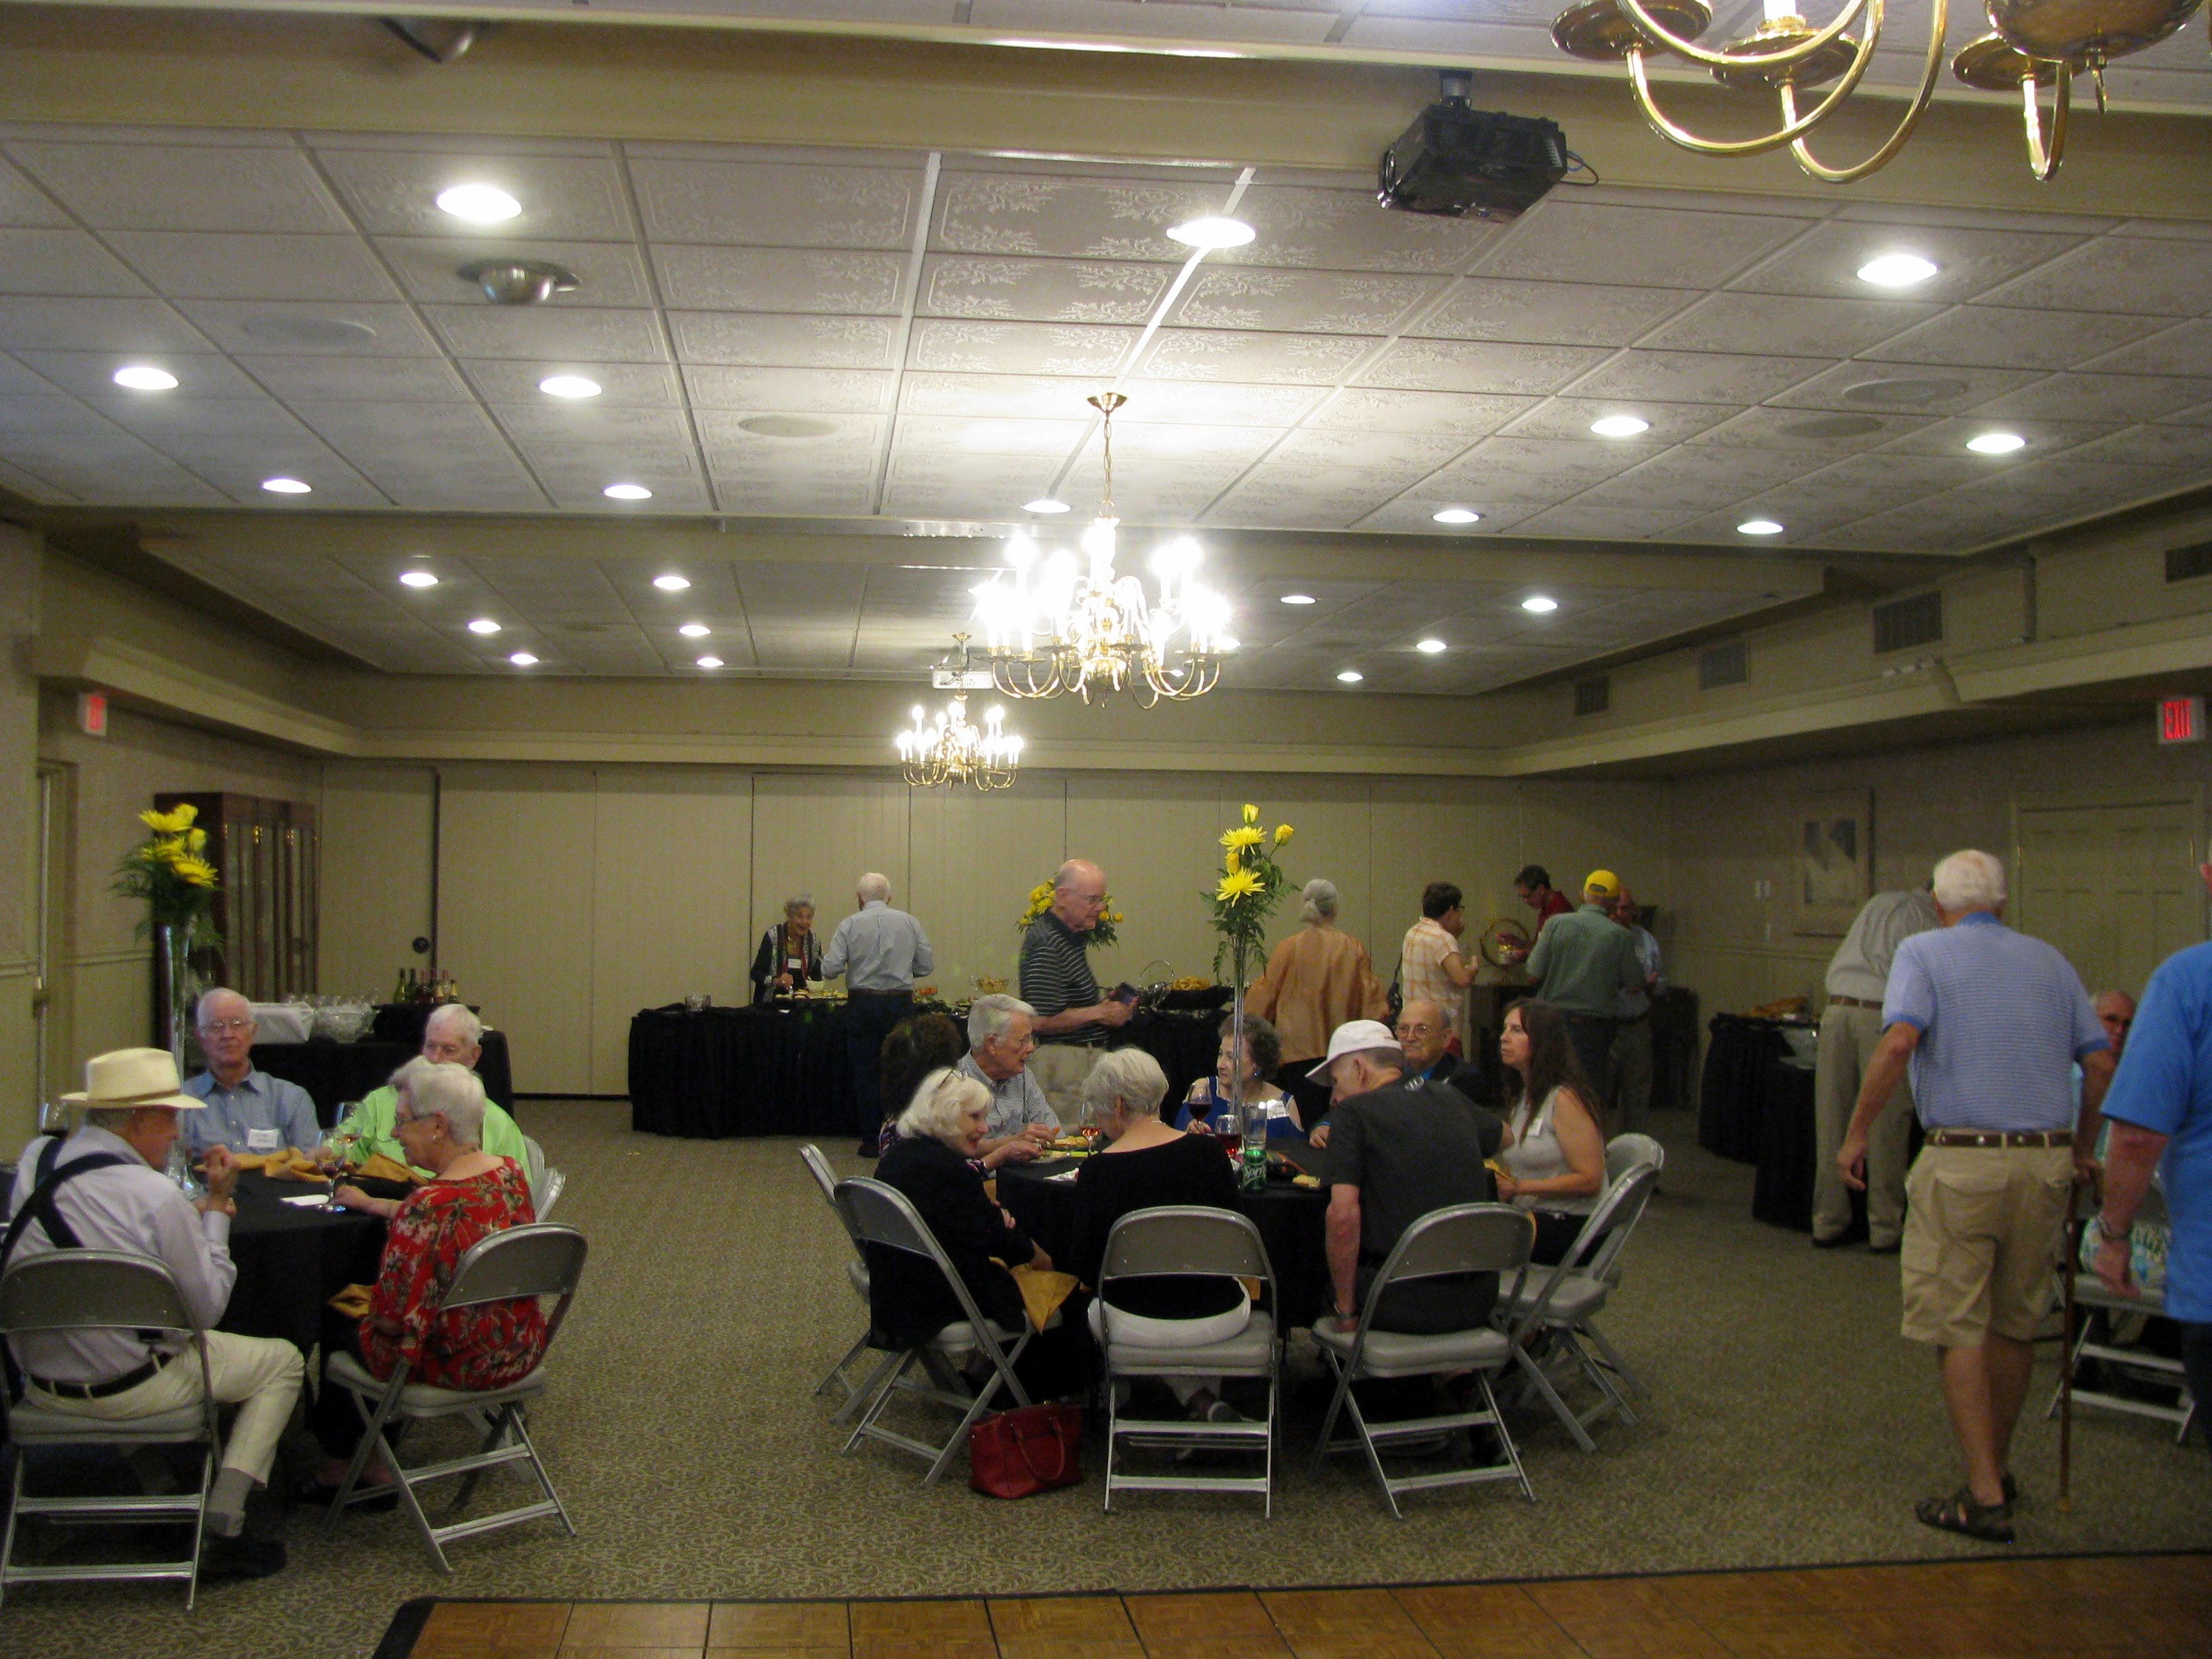 Friday's reception, looking toward the hors d'oeuvres table.